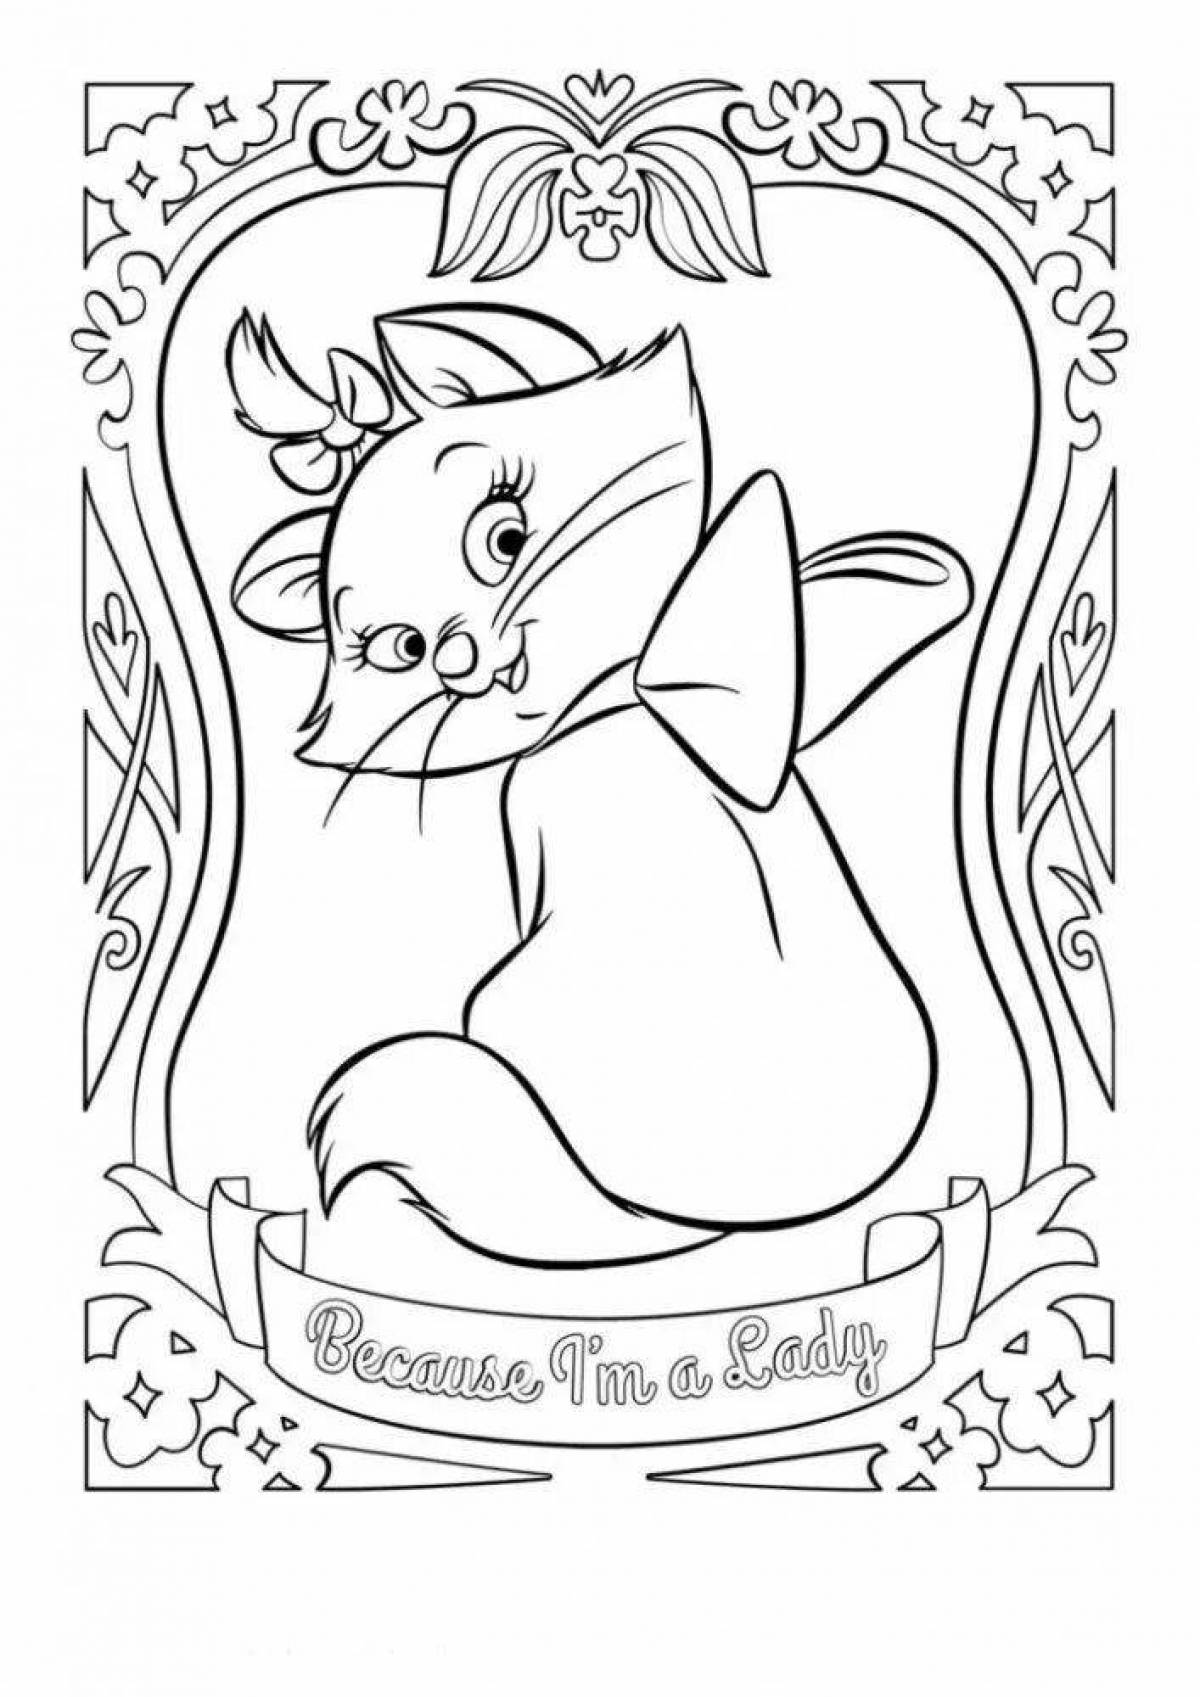 Marie kitty playful coloring page